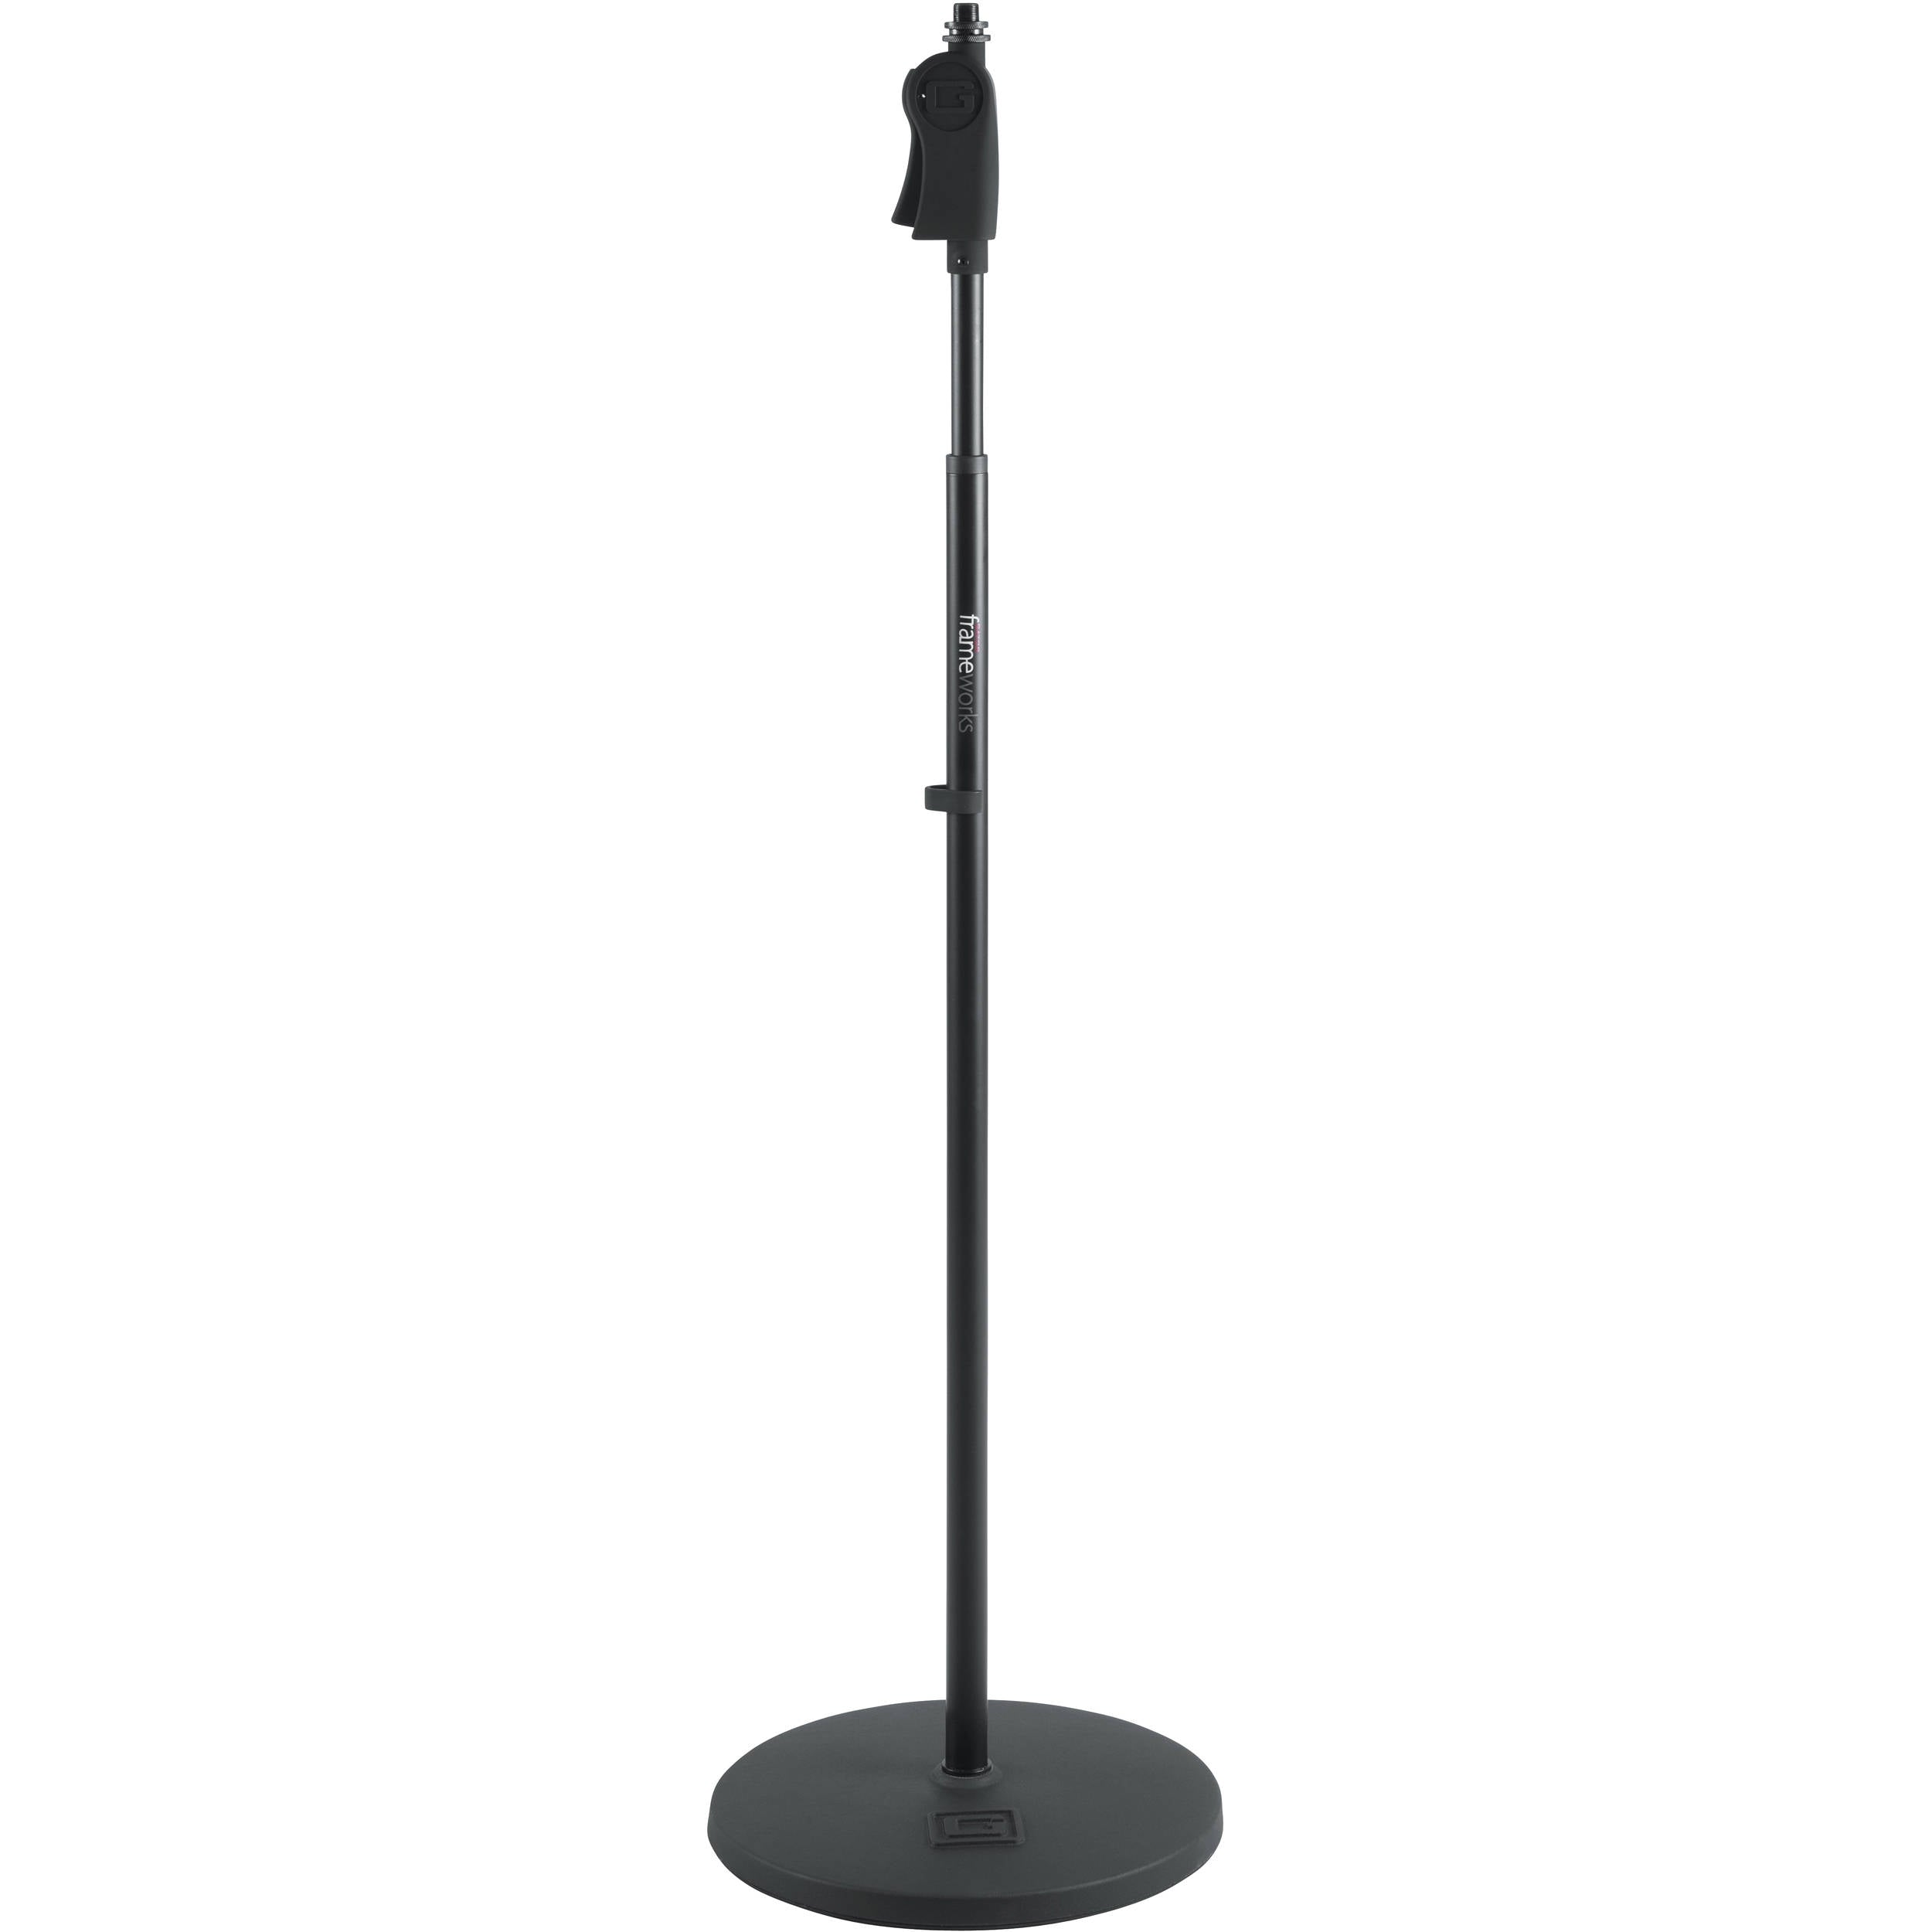 B-Stock: Gator Frameworks GFW-MIC-1201 Deluxe 12" Round Base Mic Stand Gator Cases